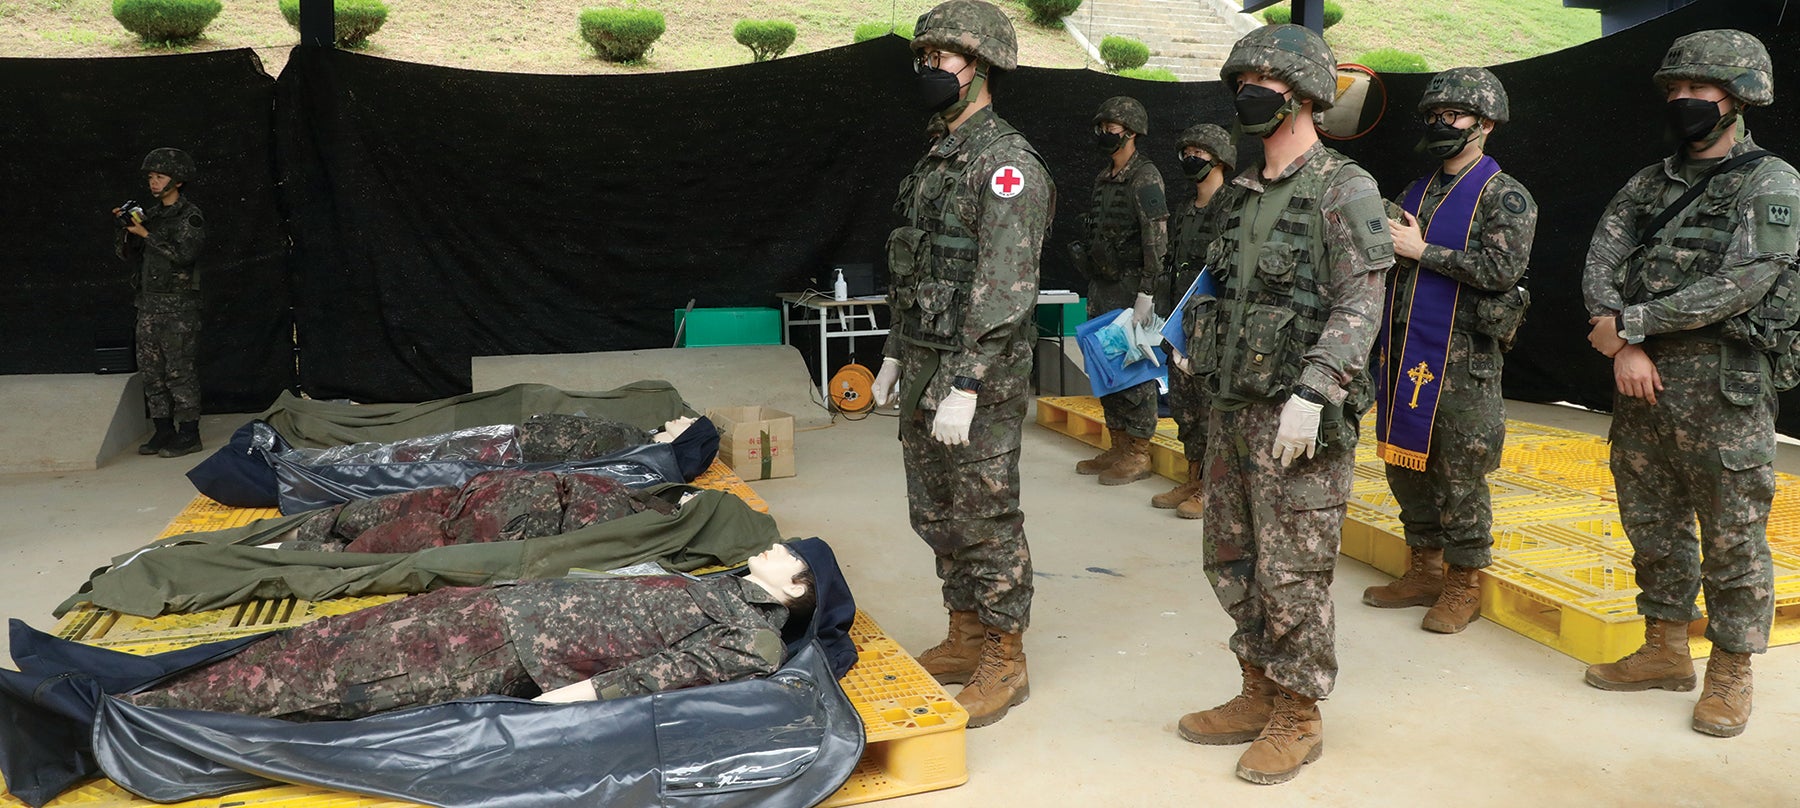 Soldiers conduct mortuary affairs collection point training in South Korea. (Credit: U.S. Army/1st Lt. Alexander Yang)